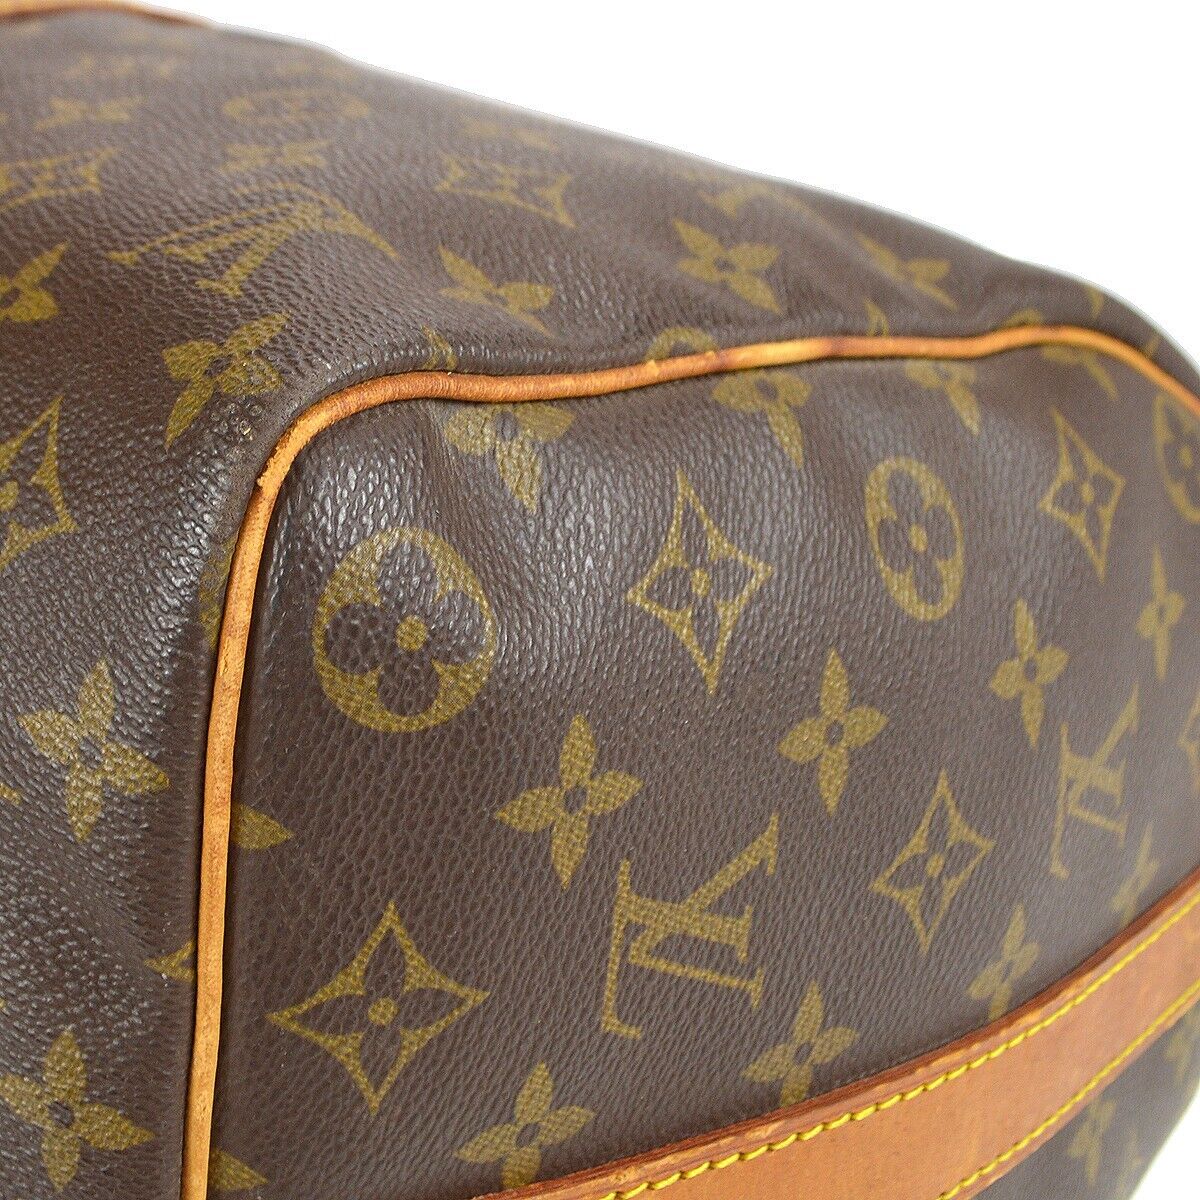 Louis Vuitton Keepall Bandouliere 45 Monogram ( RRP £1,740) in